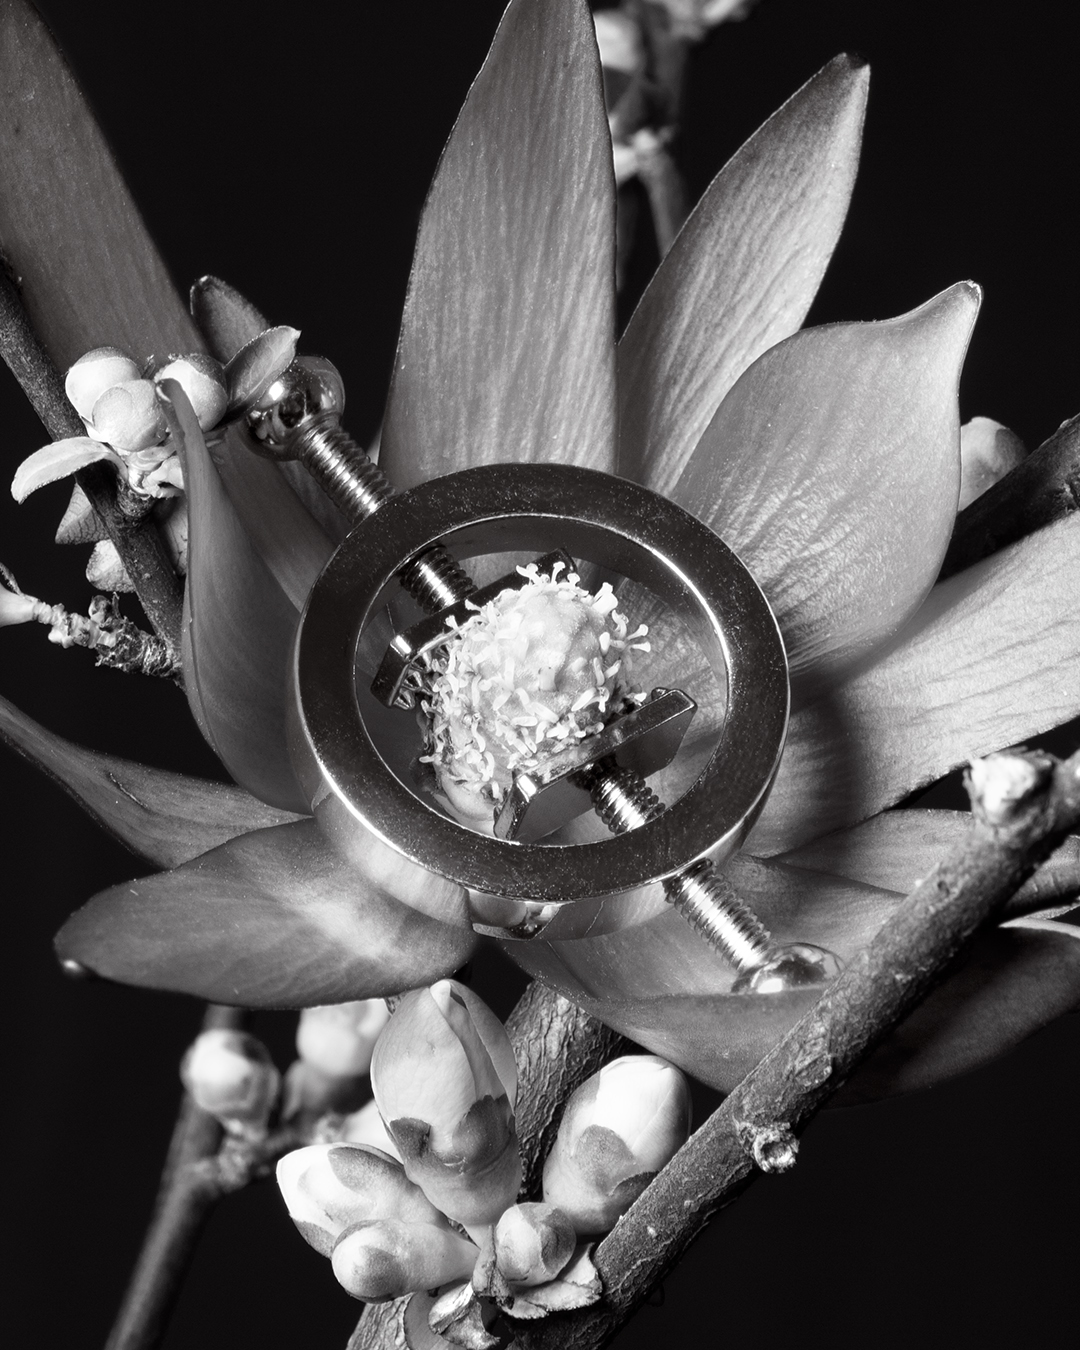 Close up black and white image of a flower pistil in a nipple clamp